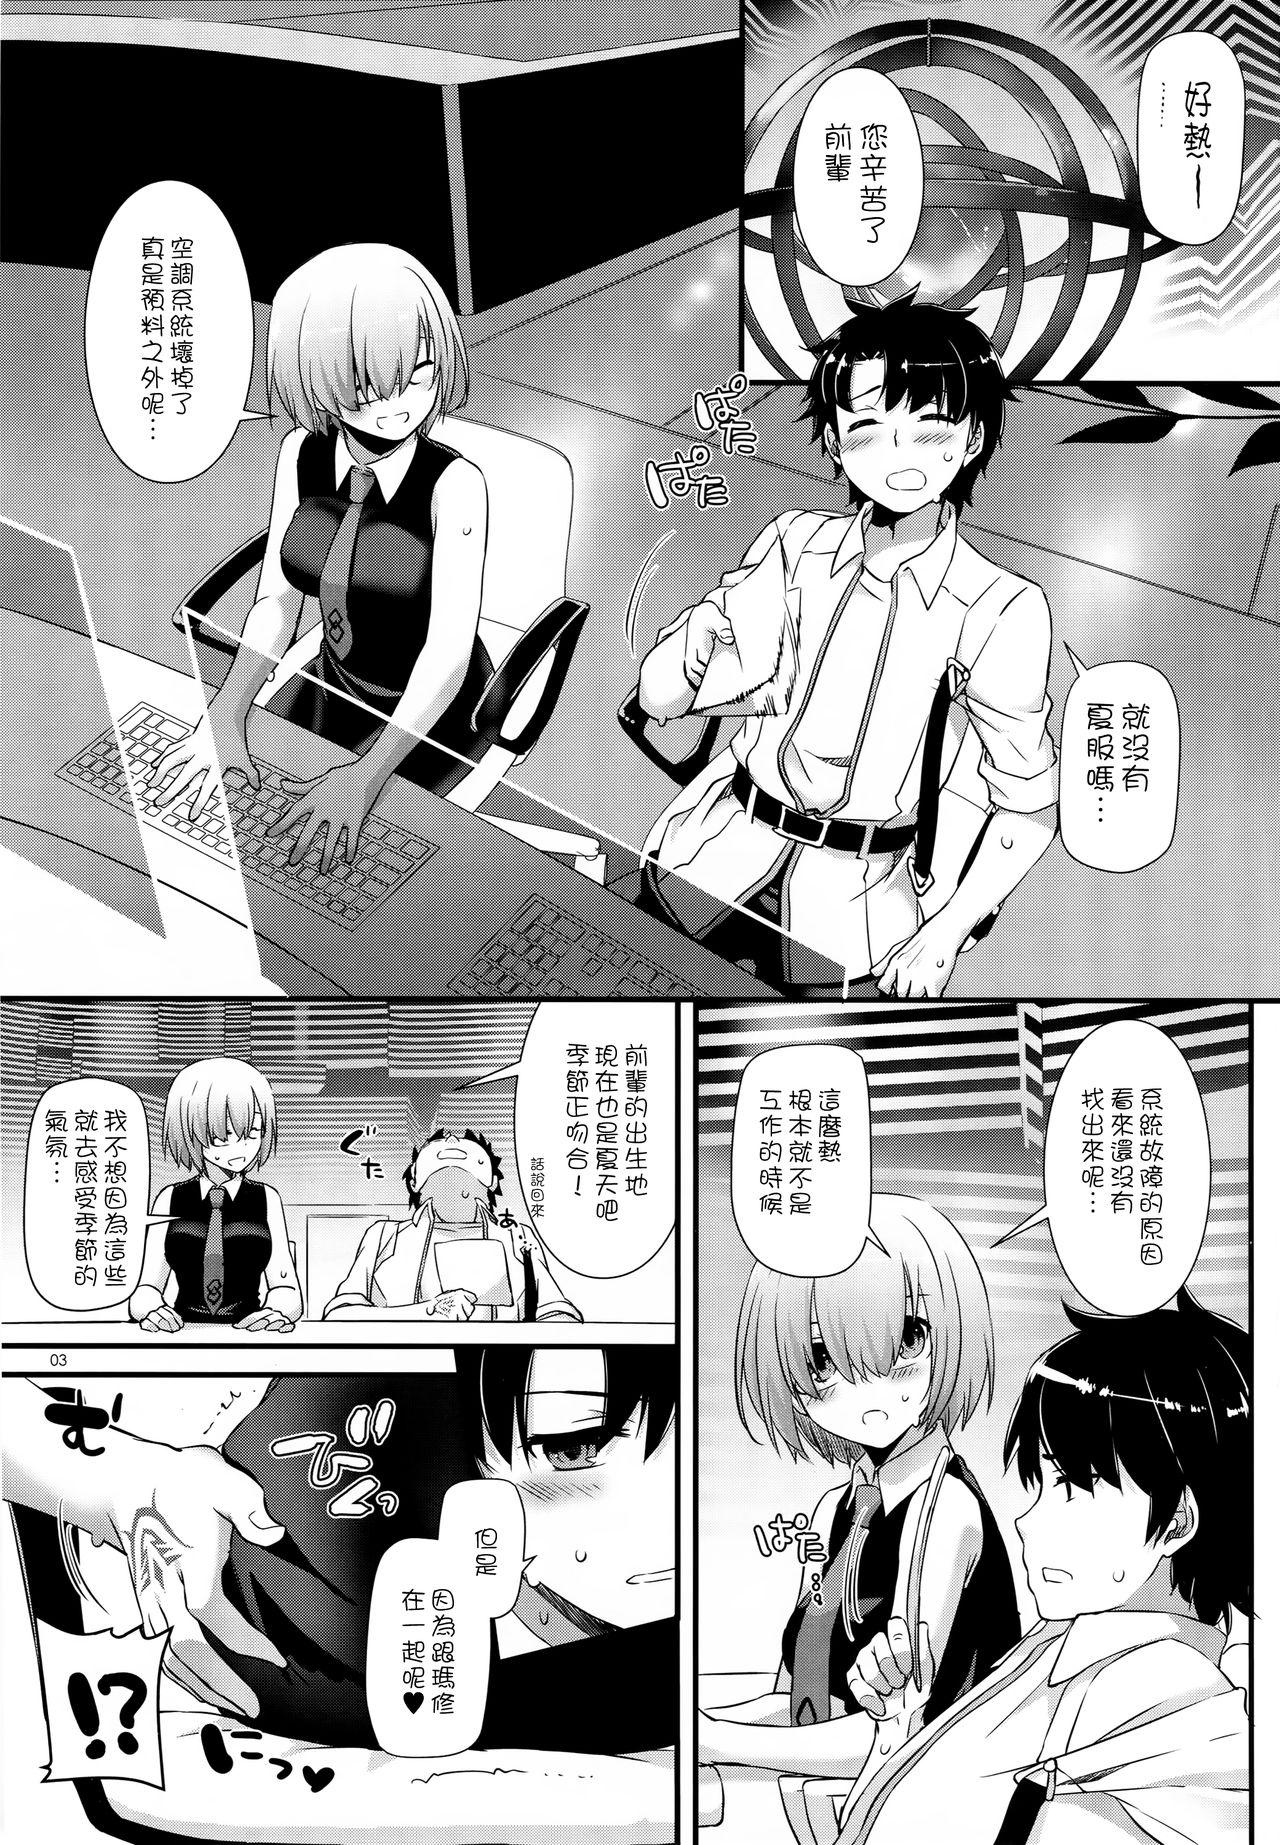 Ex Girlfriends D.L. action 116 - Fate grand order Tiny Titties - Page 3